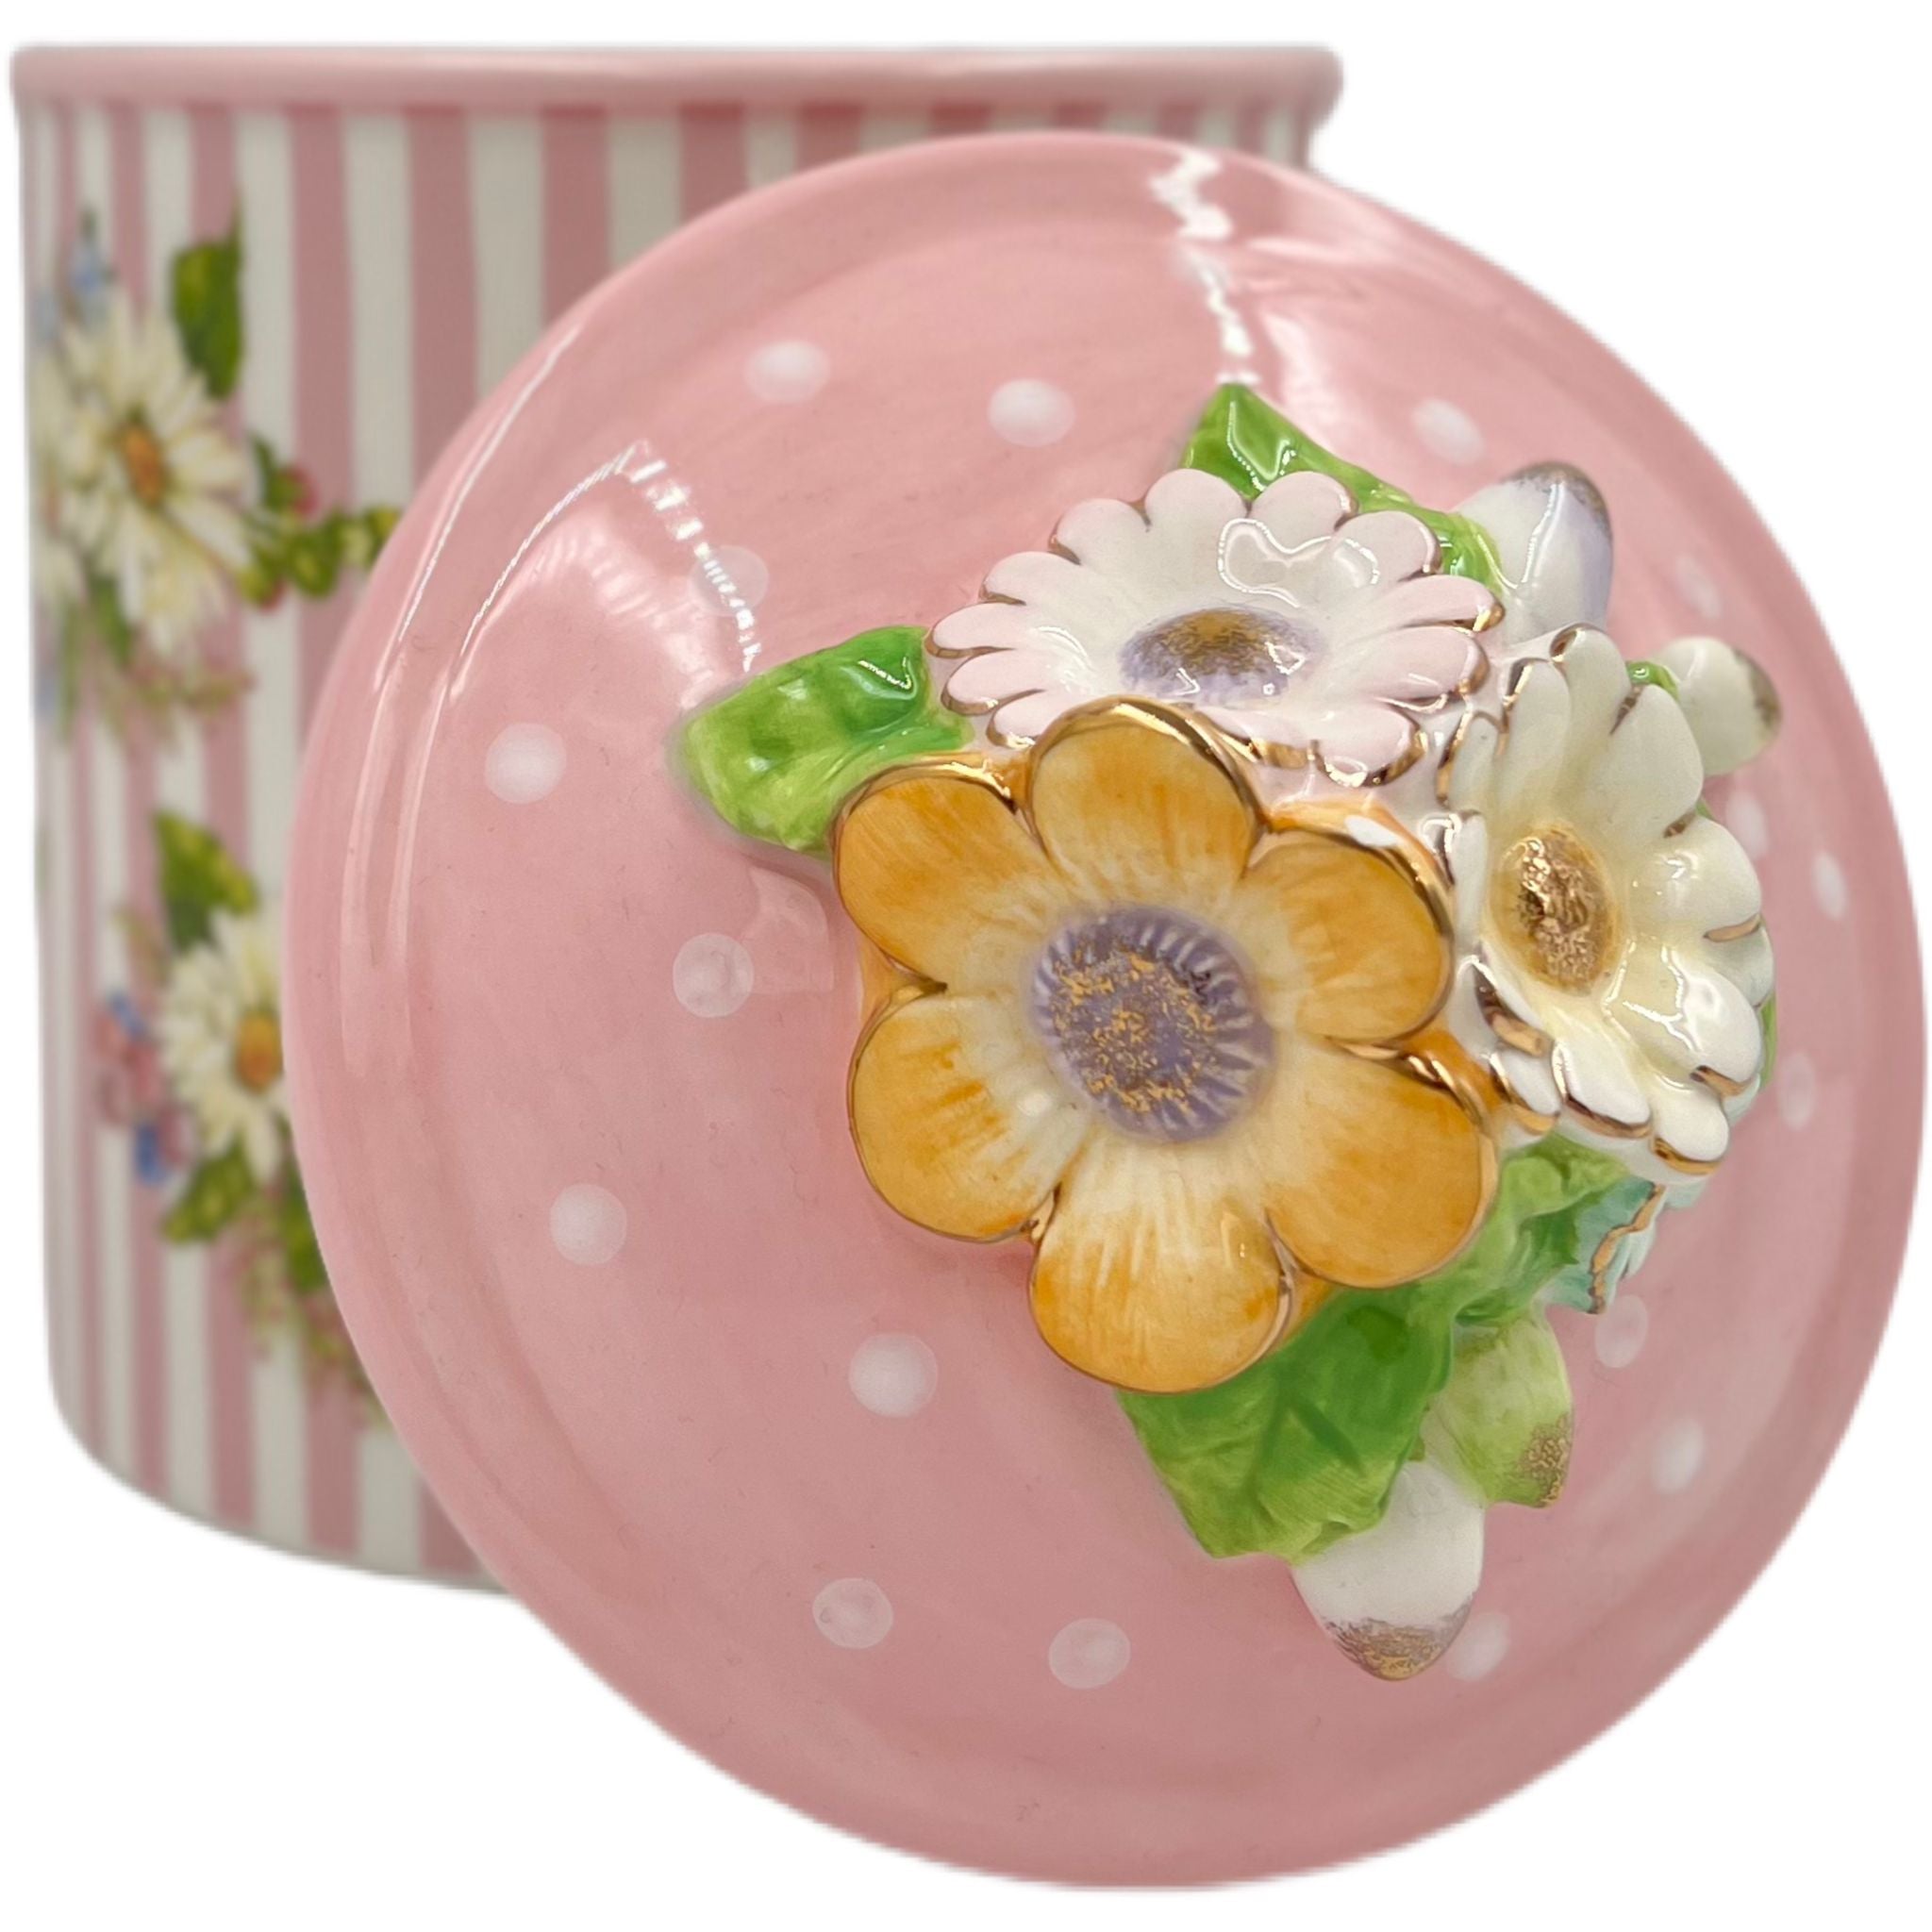 MacKenzie-Childs Wildflowers Small Canister - Pink